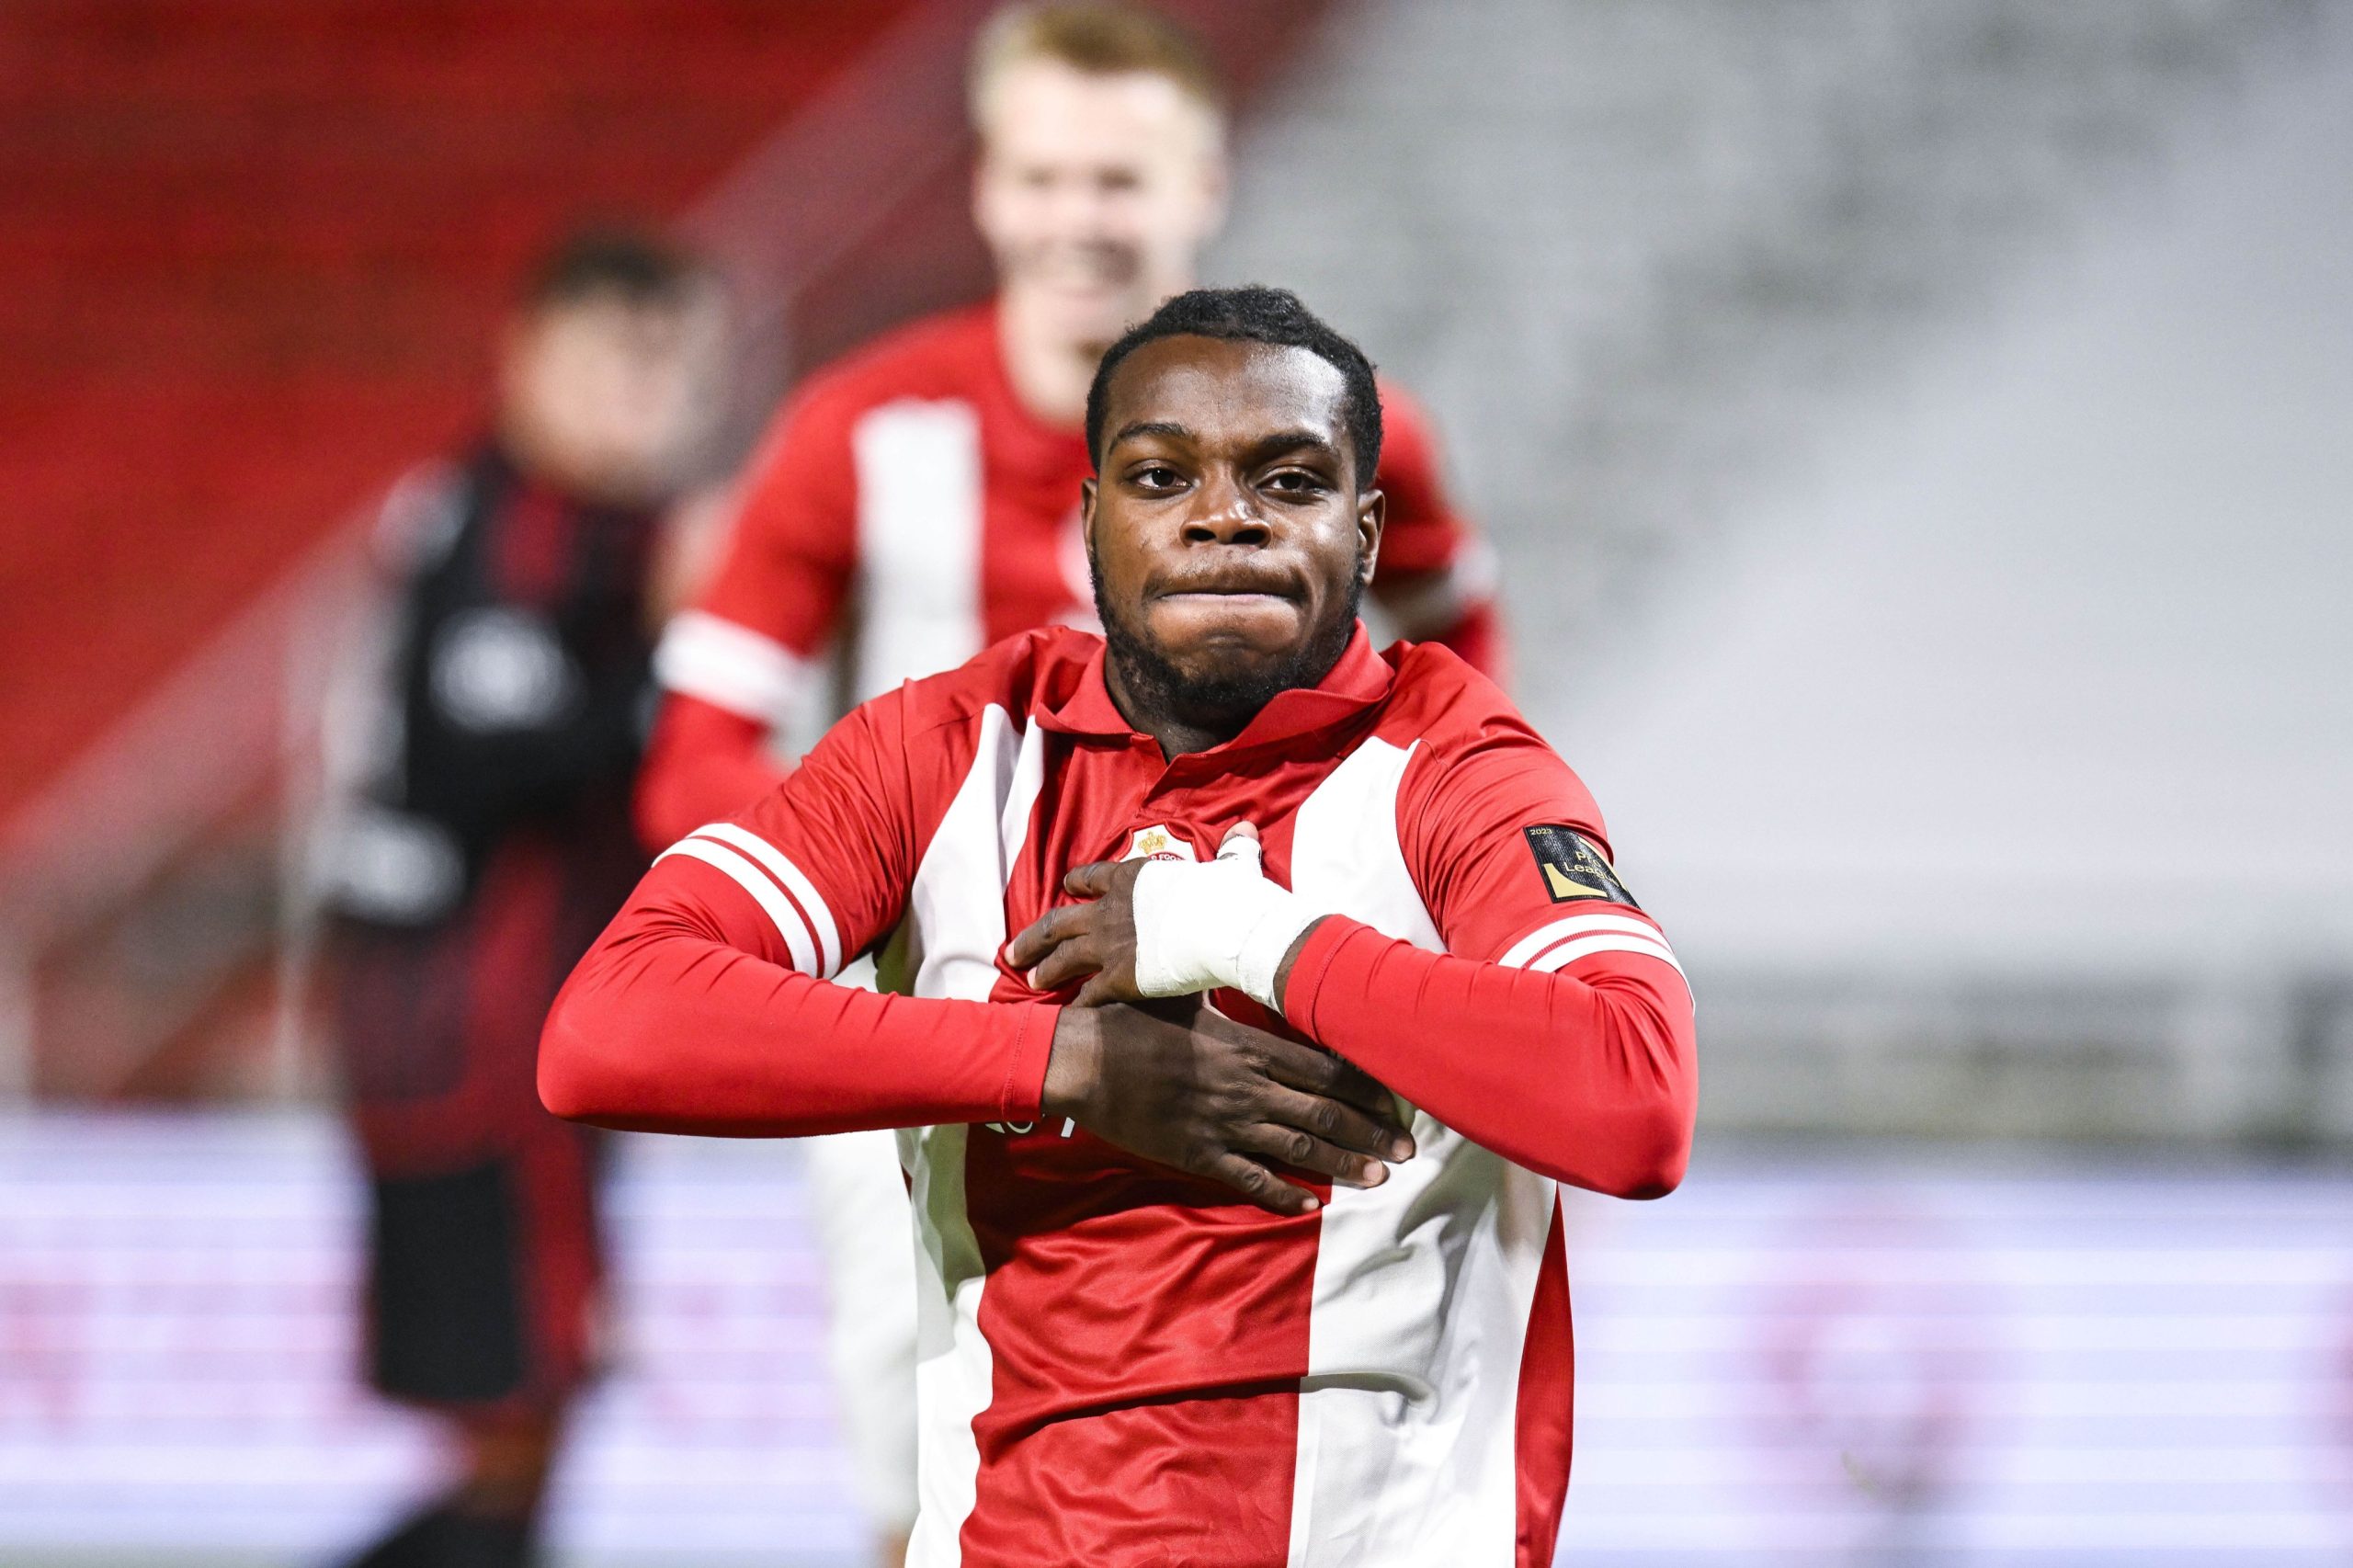 Troubled Antwerp forced to sell Nigerian youngster